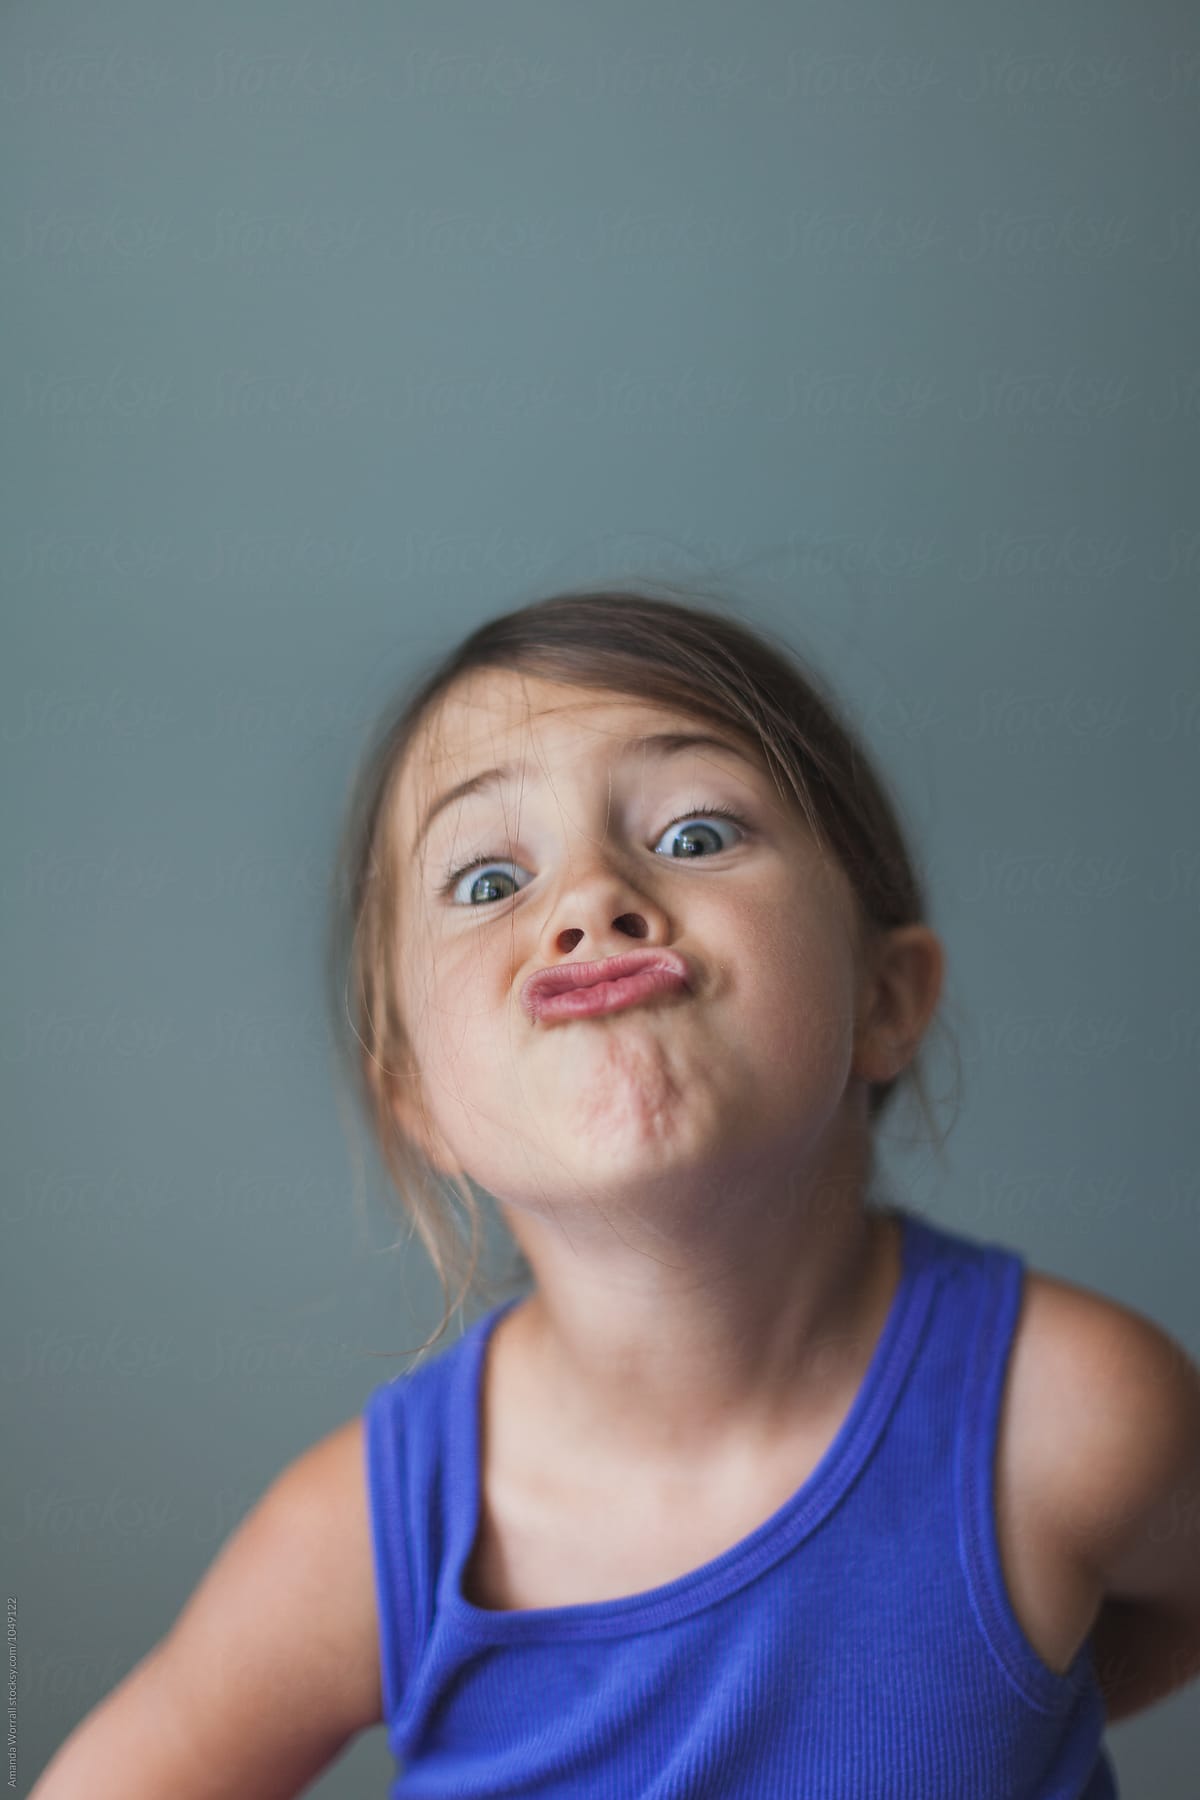 Simple indoor portrait of young girl making a silly face